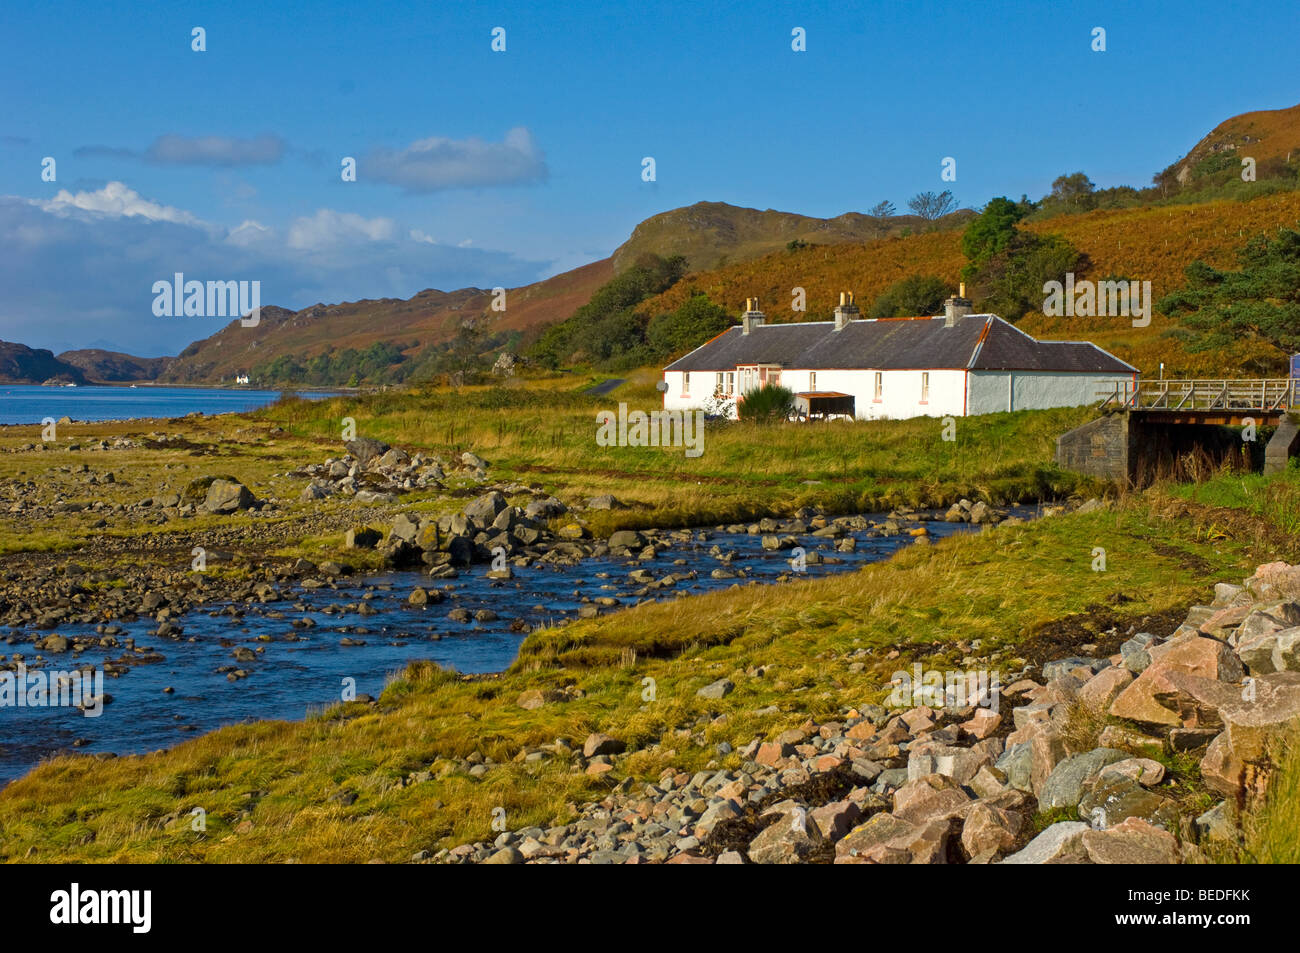 Isolated cottage at Inverie, Knoydart in Loch Nevis, I nverness-shire.   SCO 5368 Stock Photo